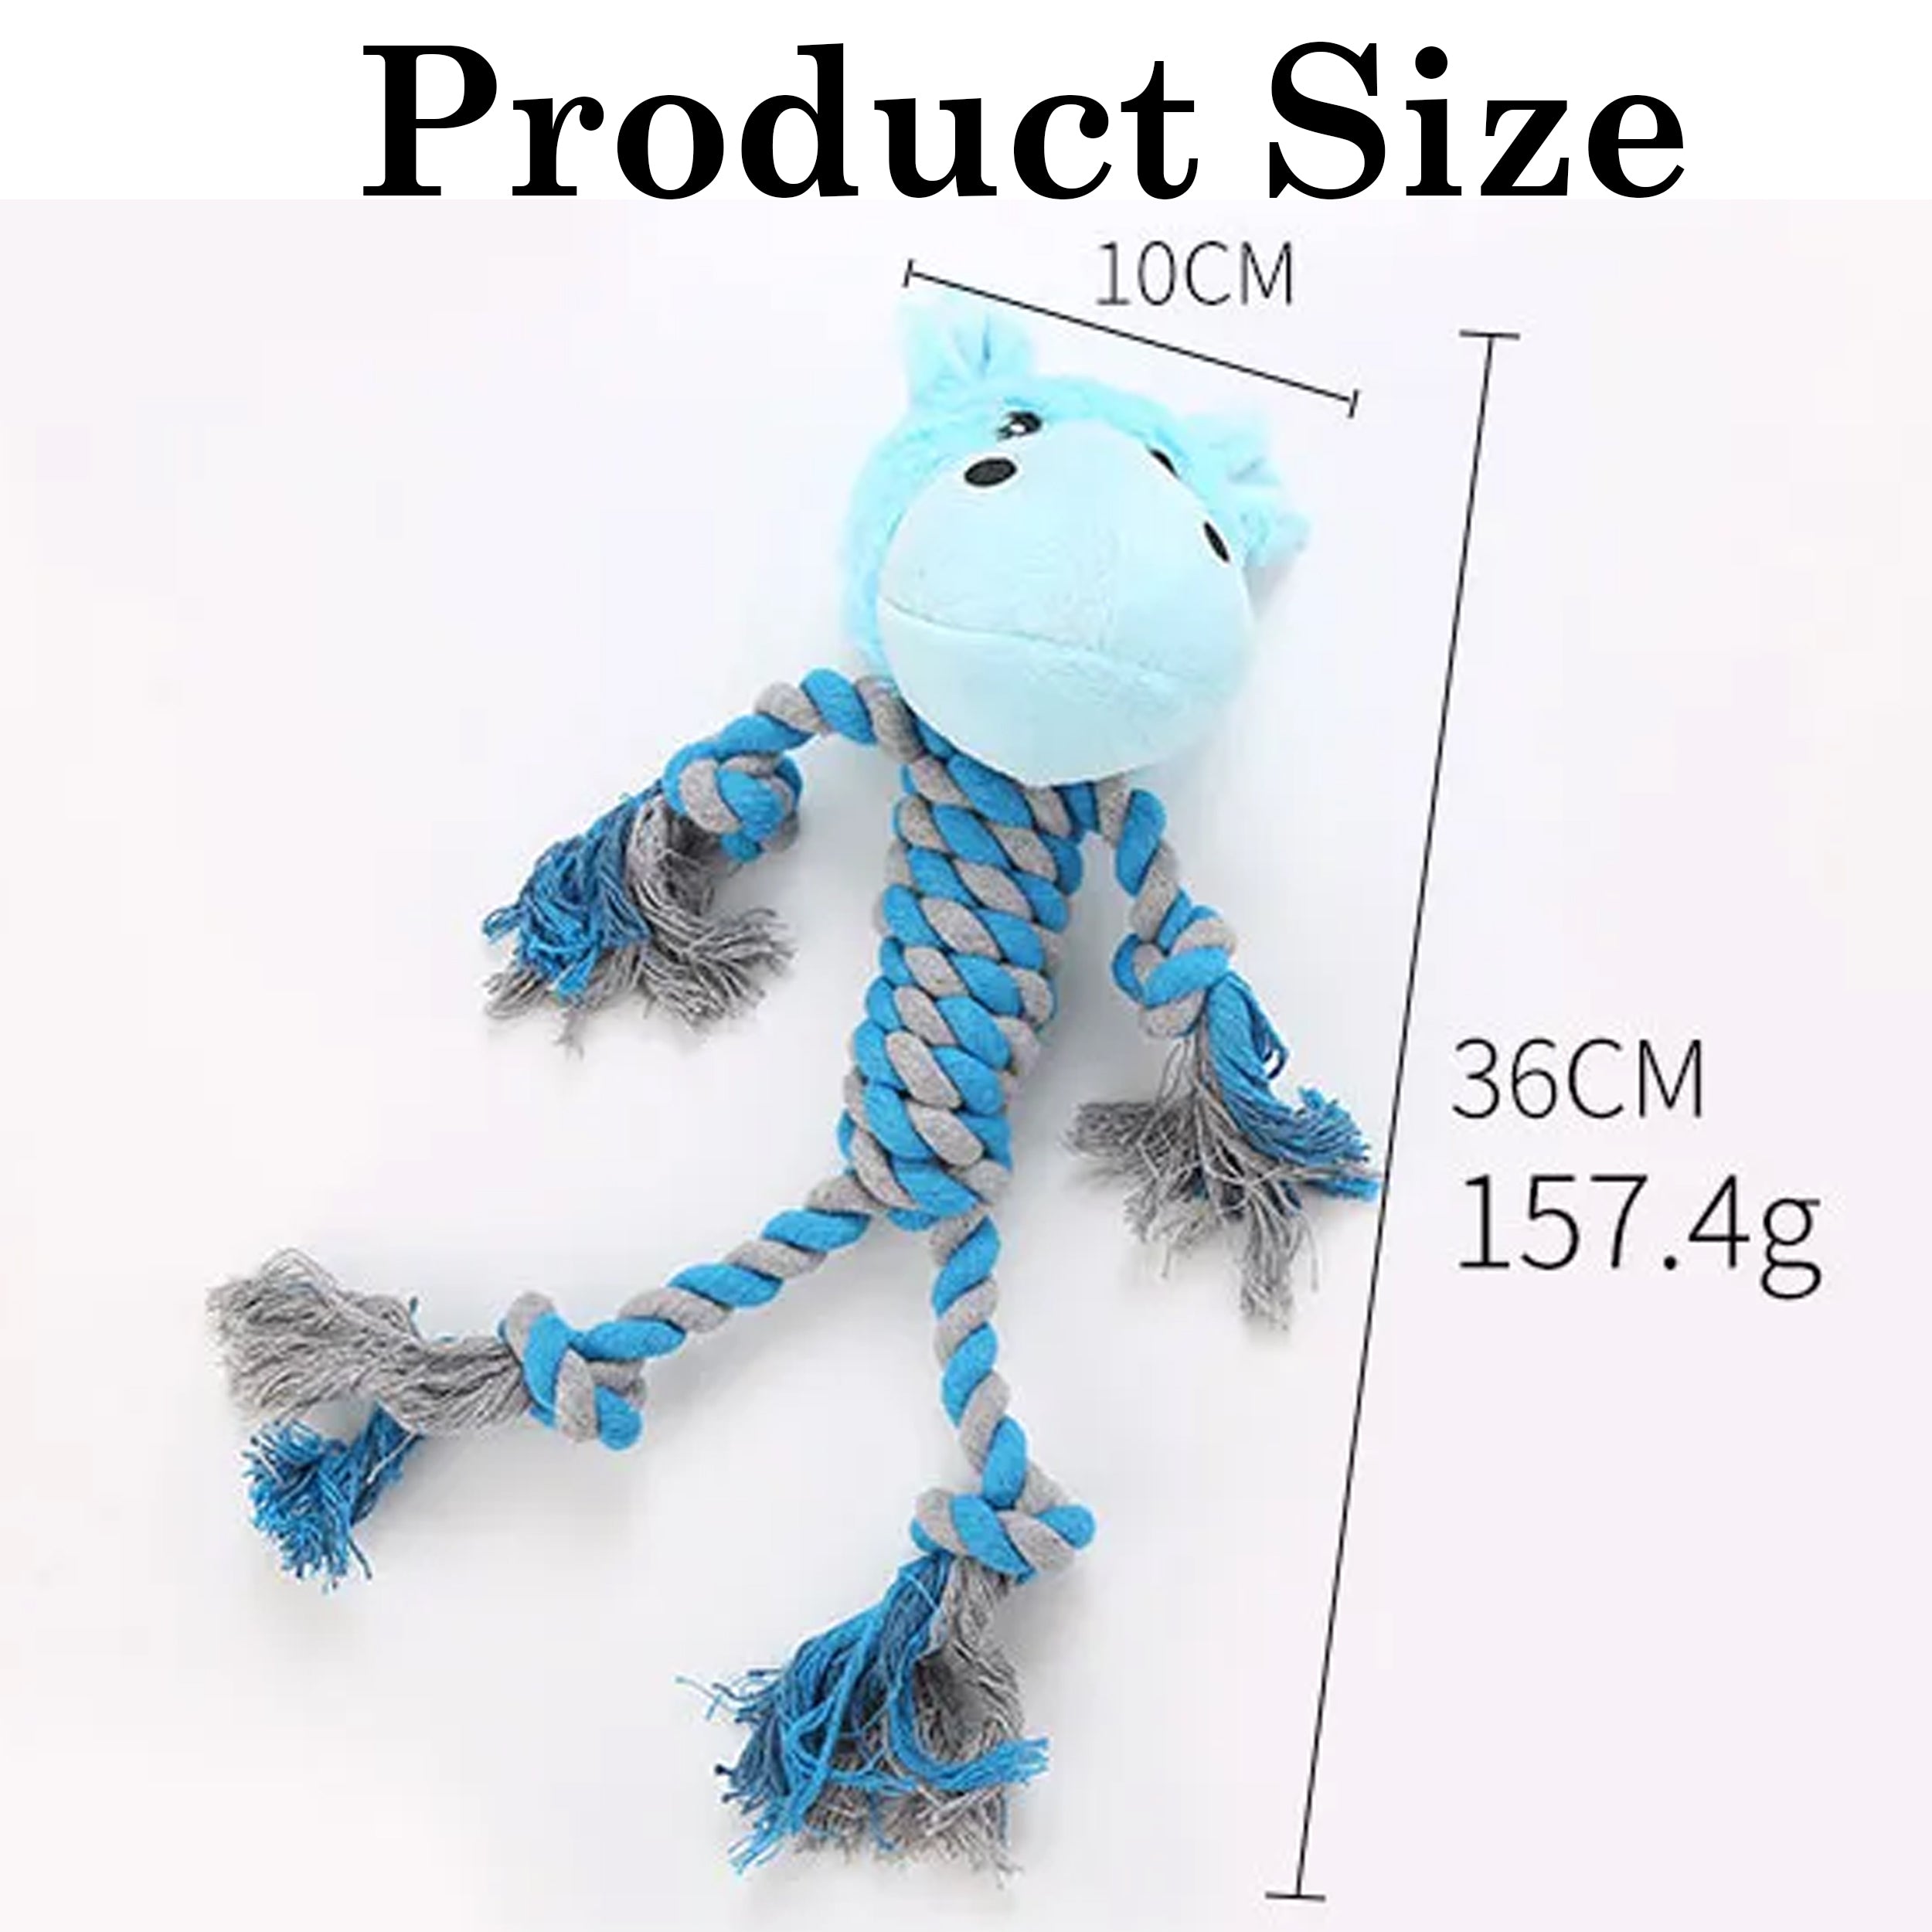 Keep Your Dog Happy and Entertained with Our Animal Stuffed with Long Legs Cotton Rope Dog Chew Plush Toy